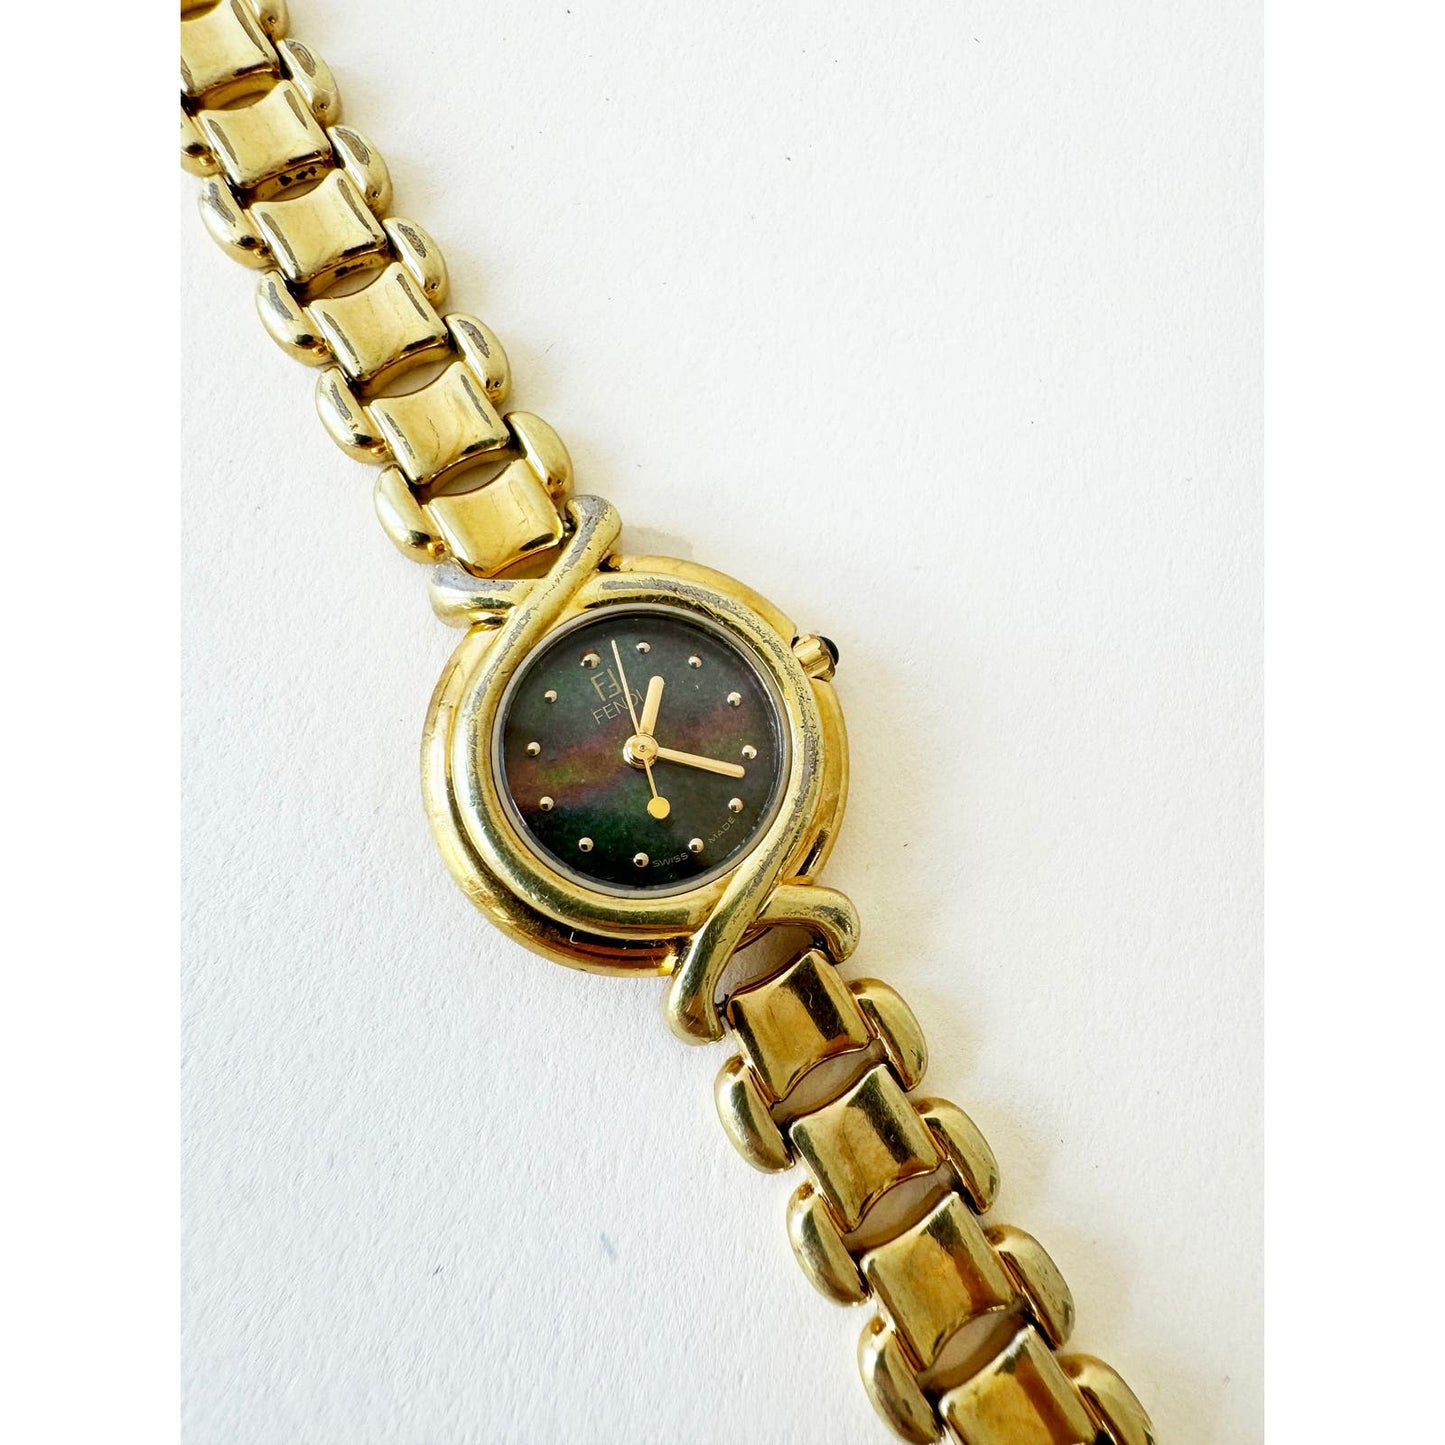 Vintage Fendi Gold Watch with Dark Mother of Pearl Face